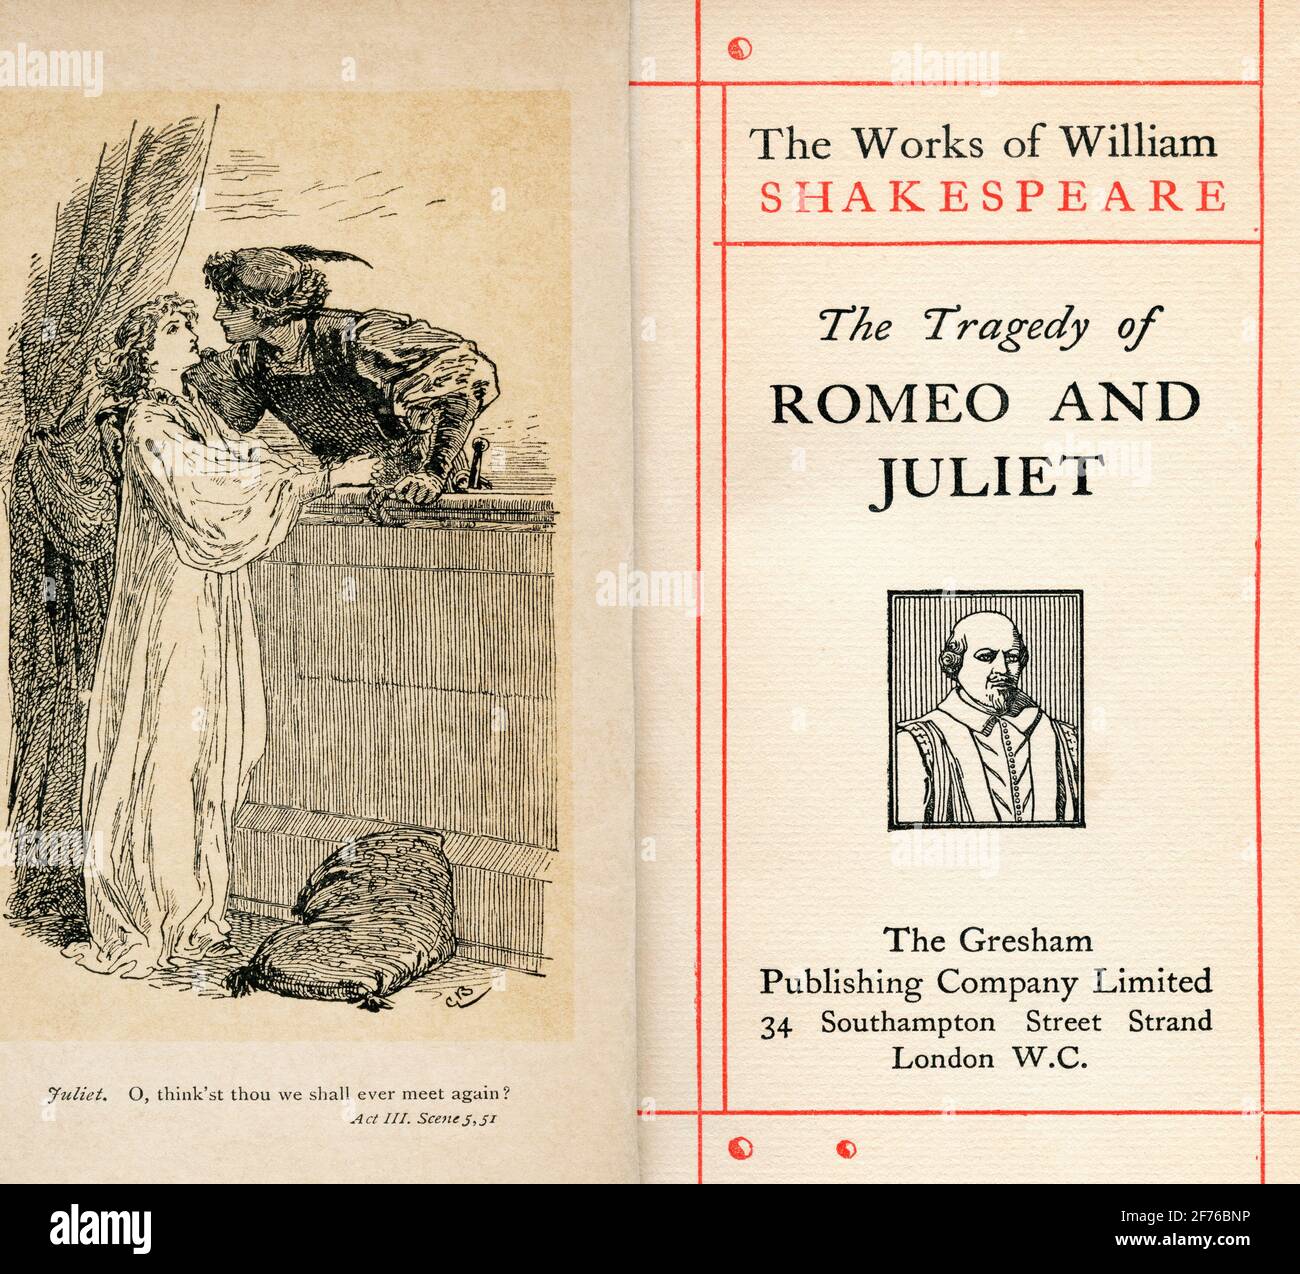 Frontispiece and title page from the Shakespeare play Romeo and Juliet. Act  III. Scene 5. Juliet, "O, thinks't thou we shall ever meet again?" From The  Works of William Shakespeare, published c.1900